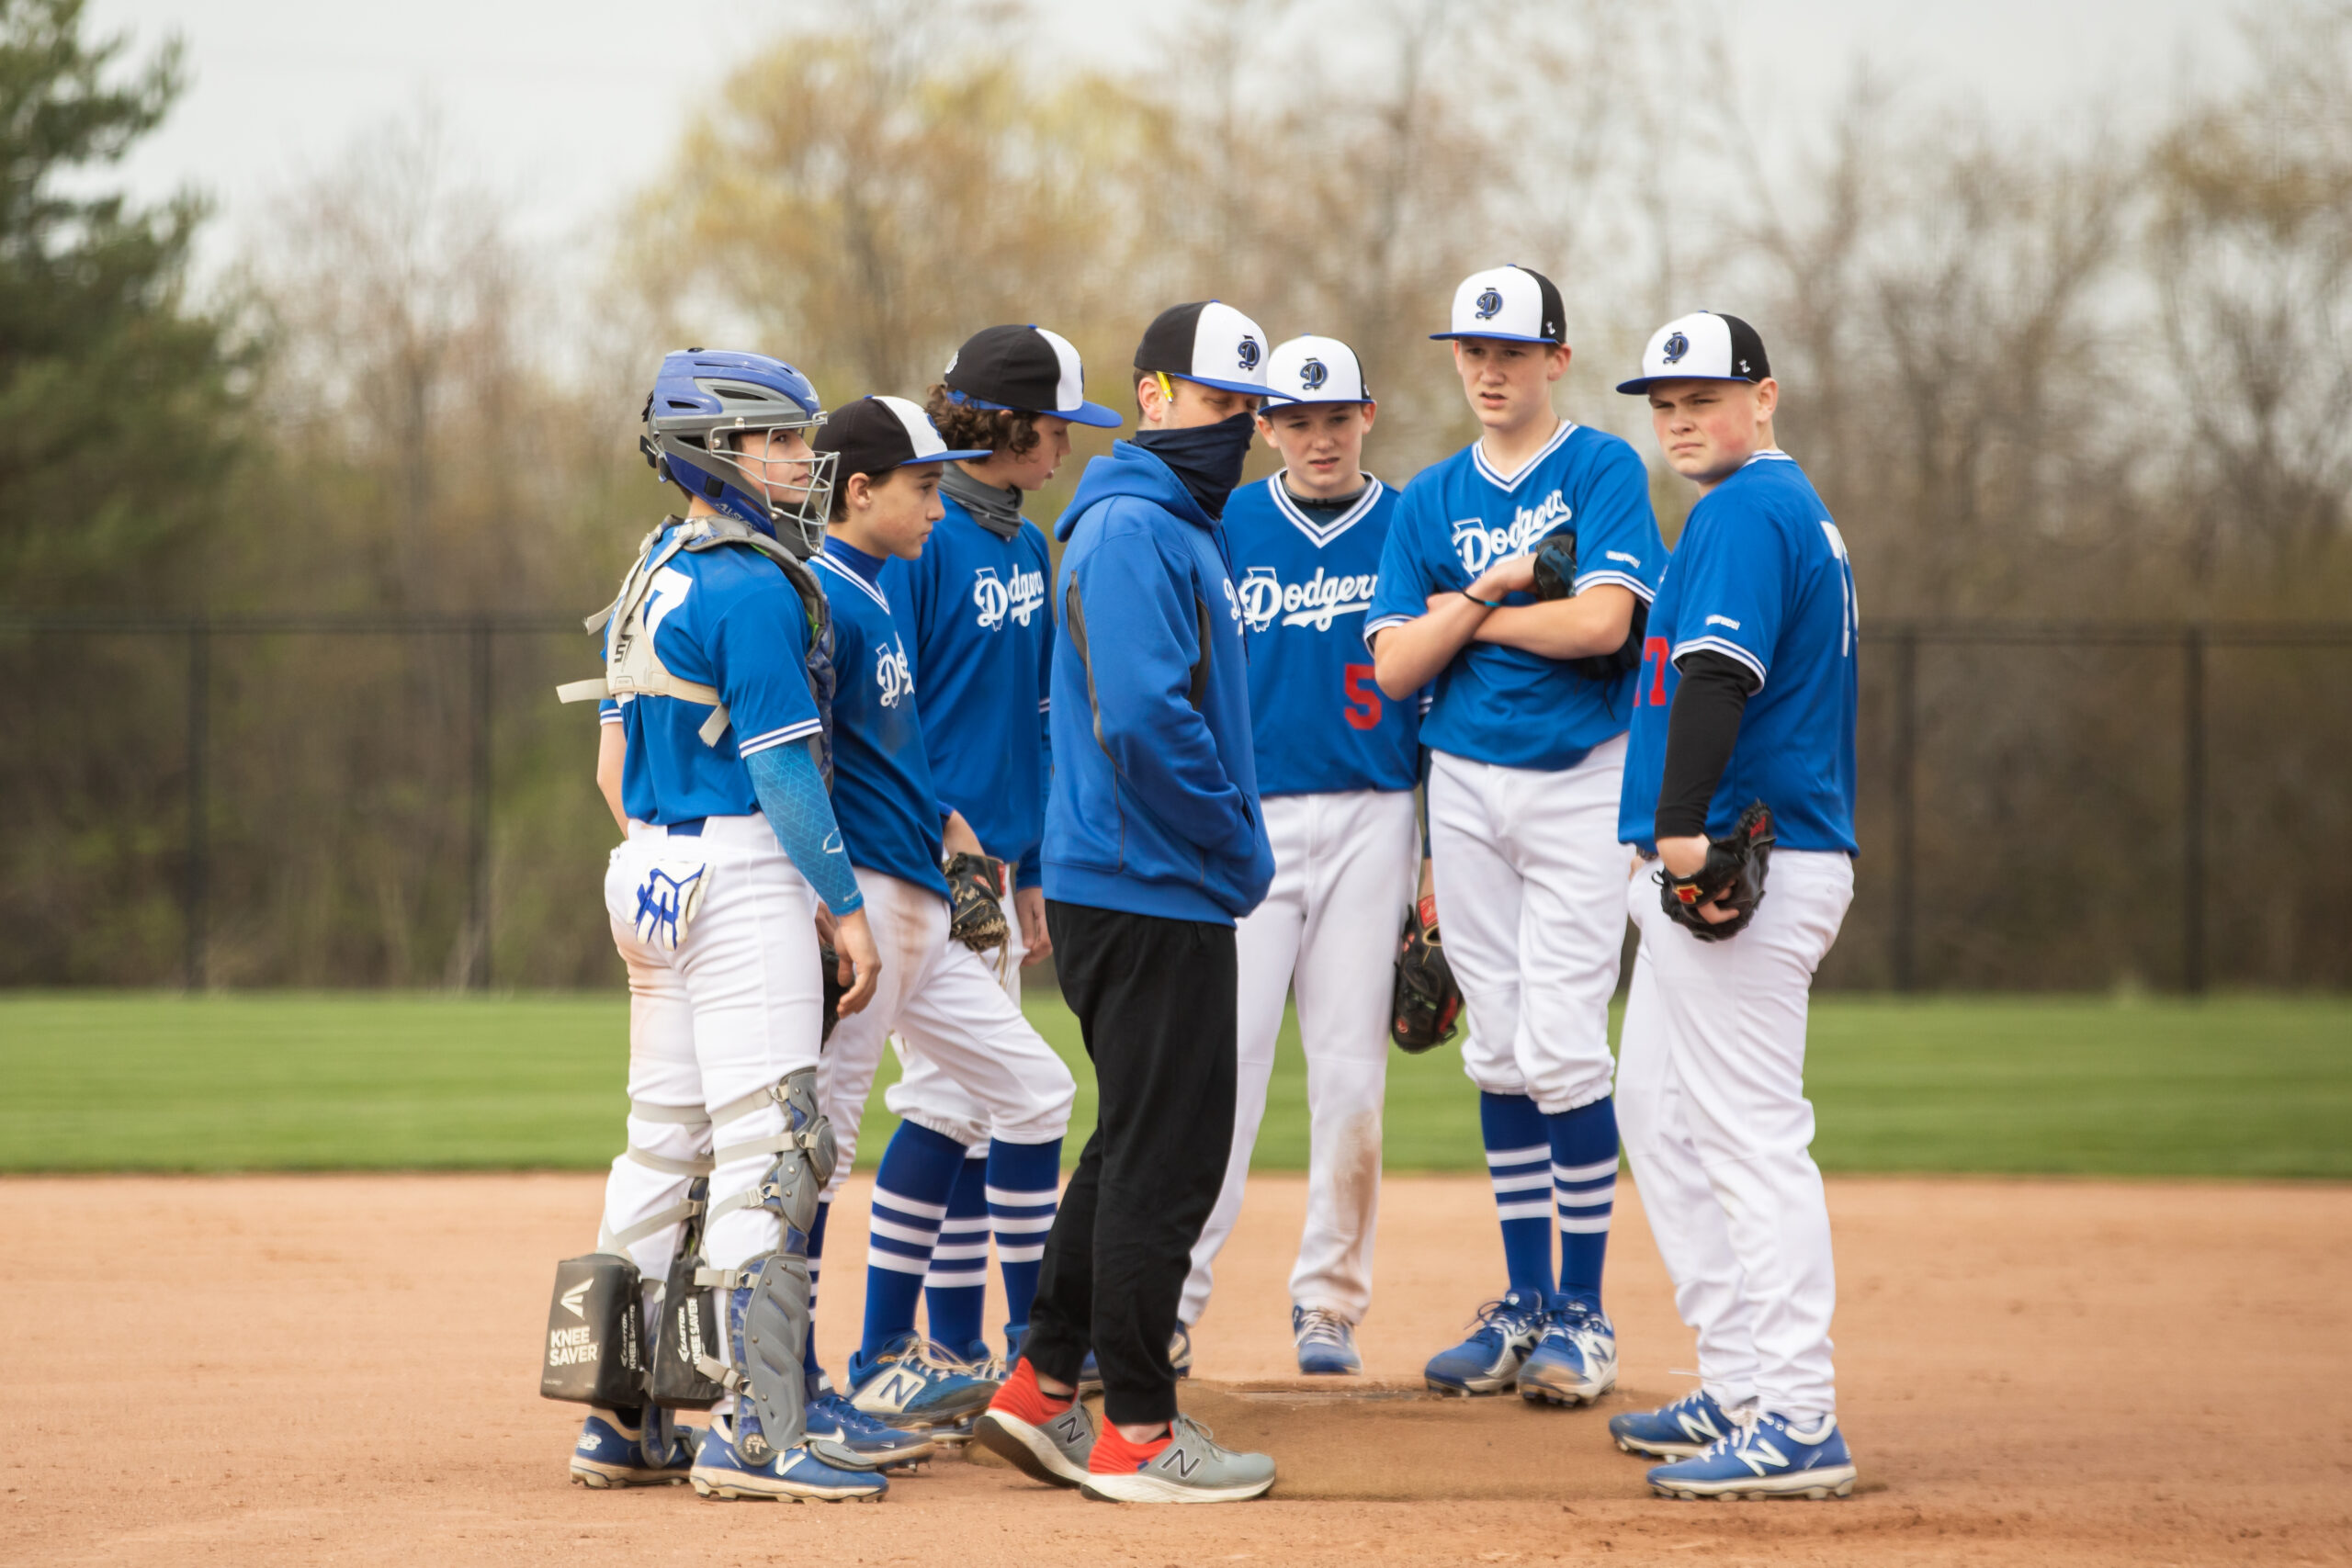 travel baseball tryout tips